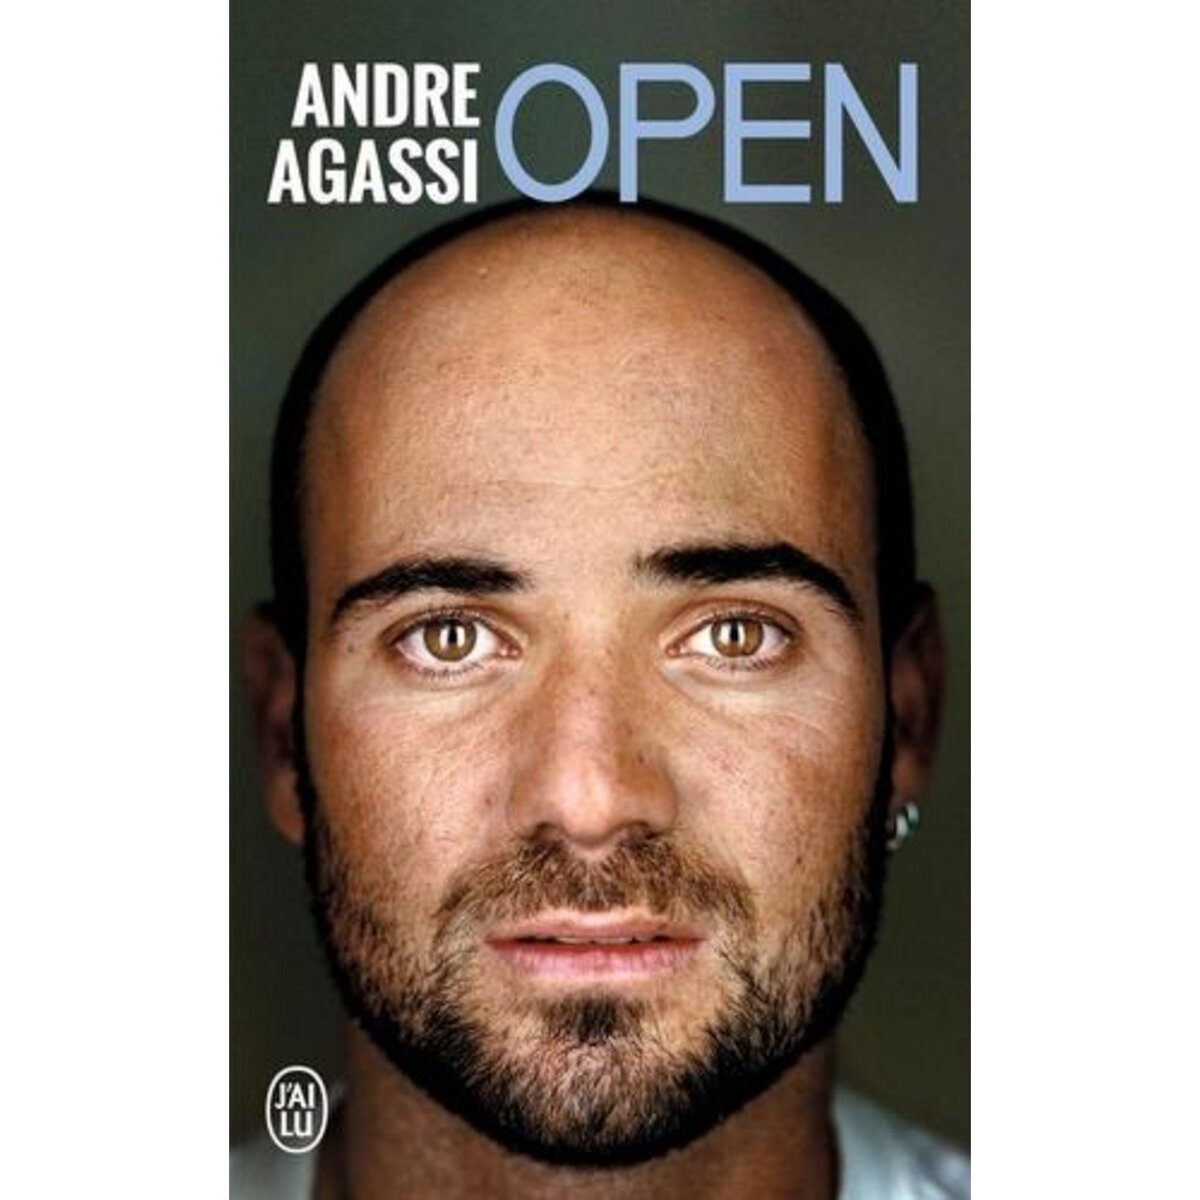  OPEN, Agassi André